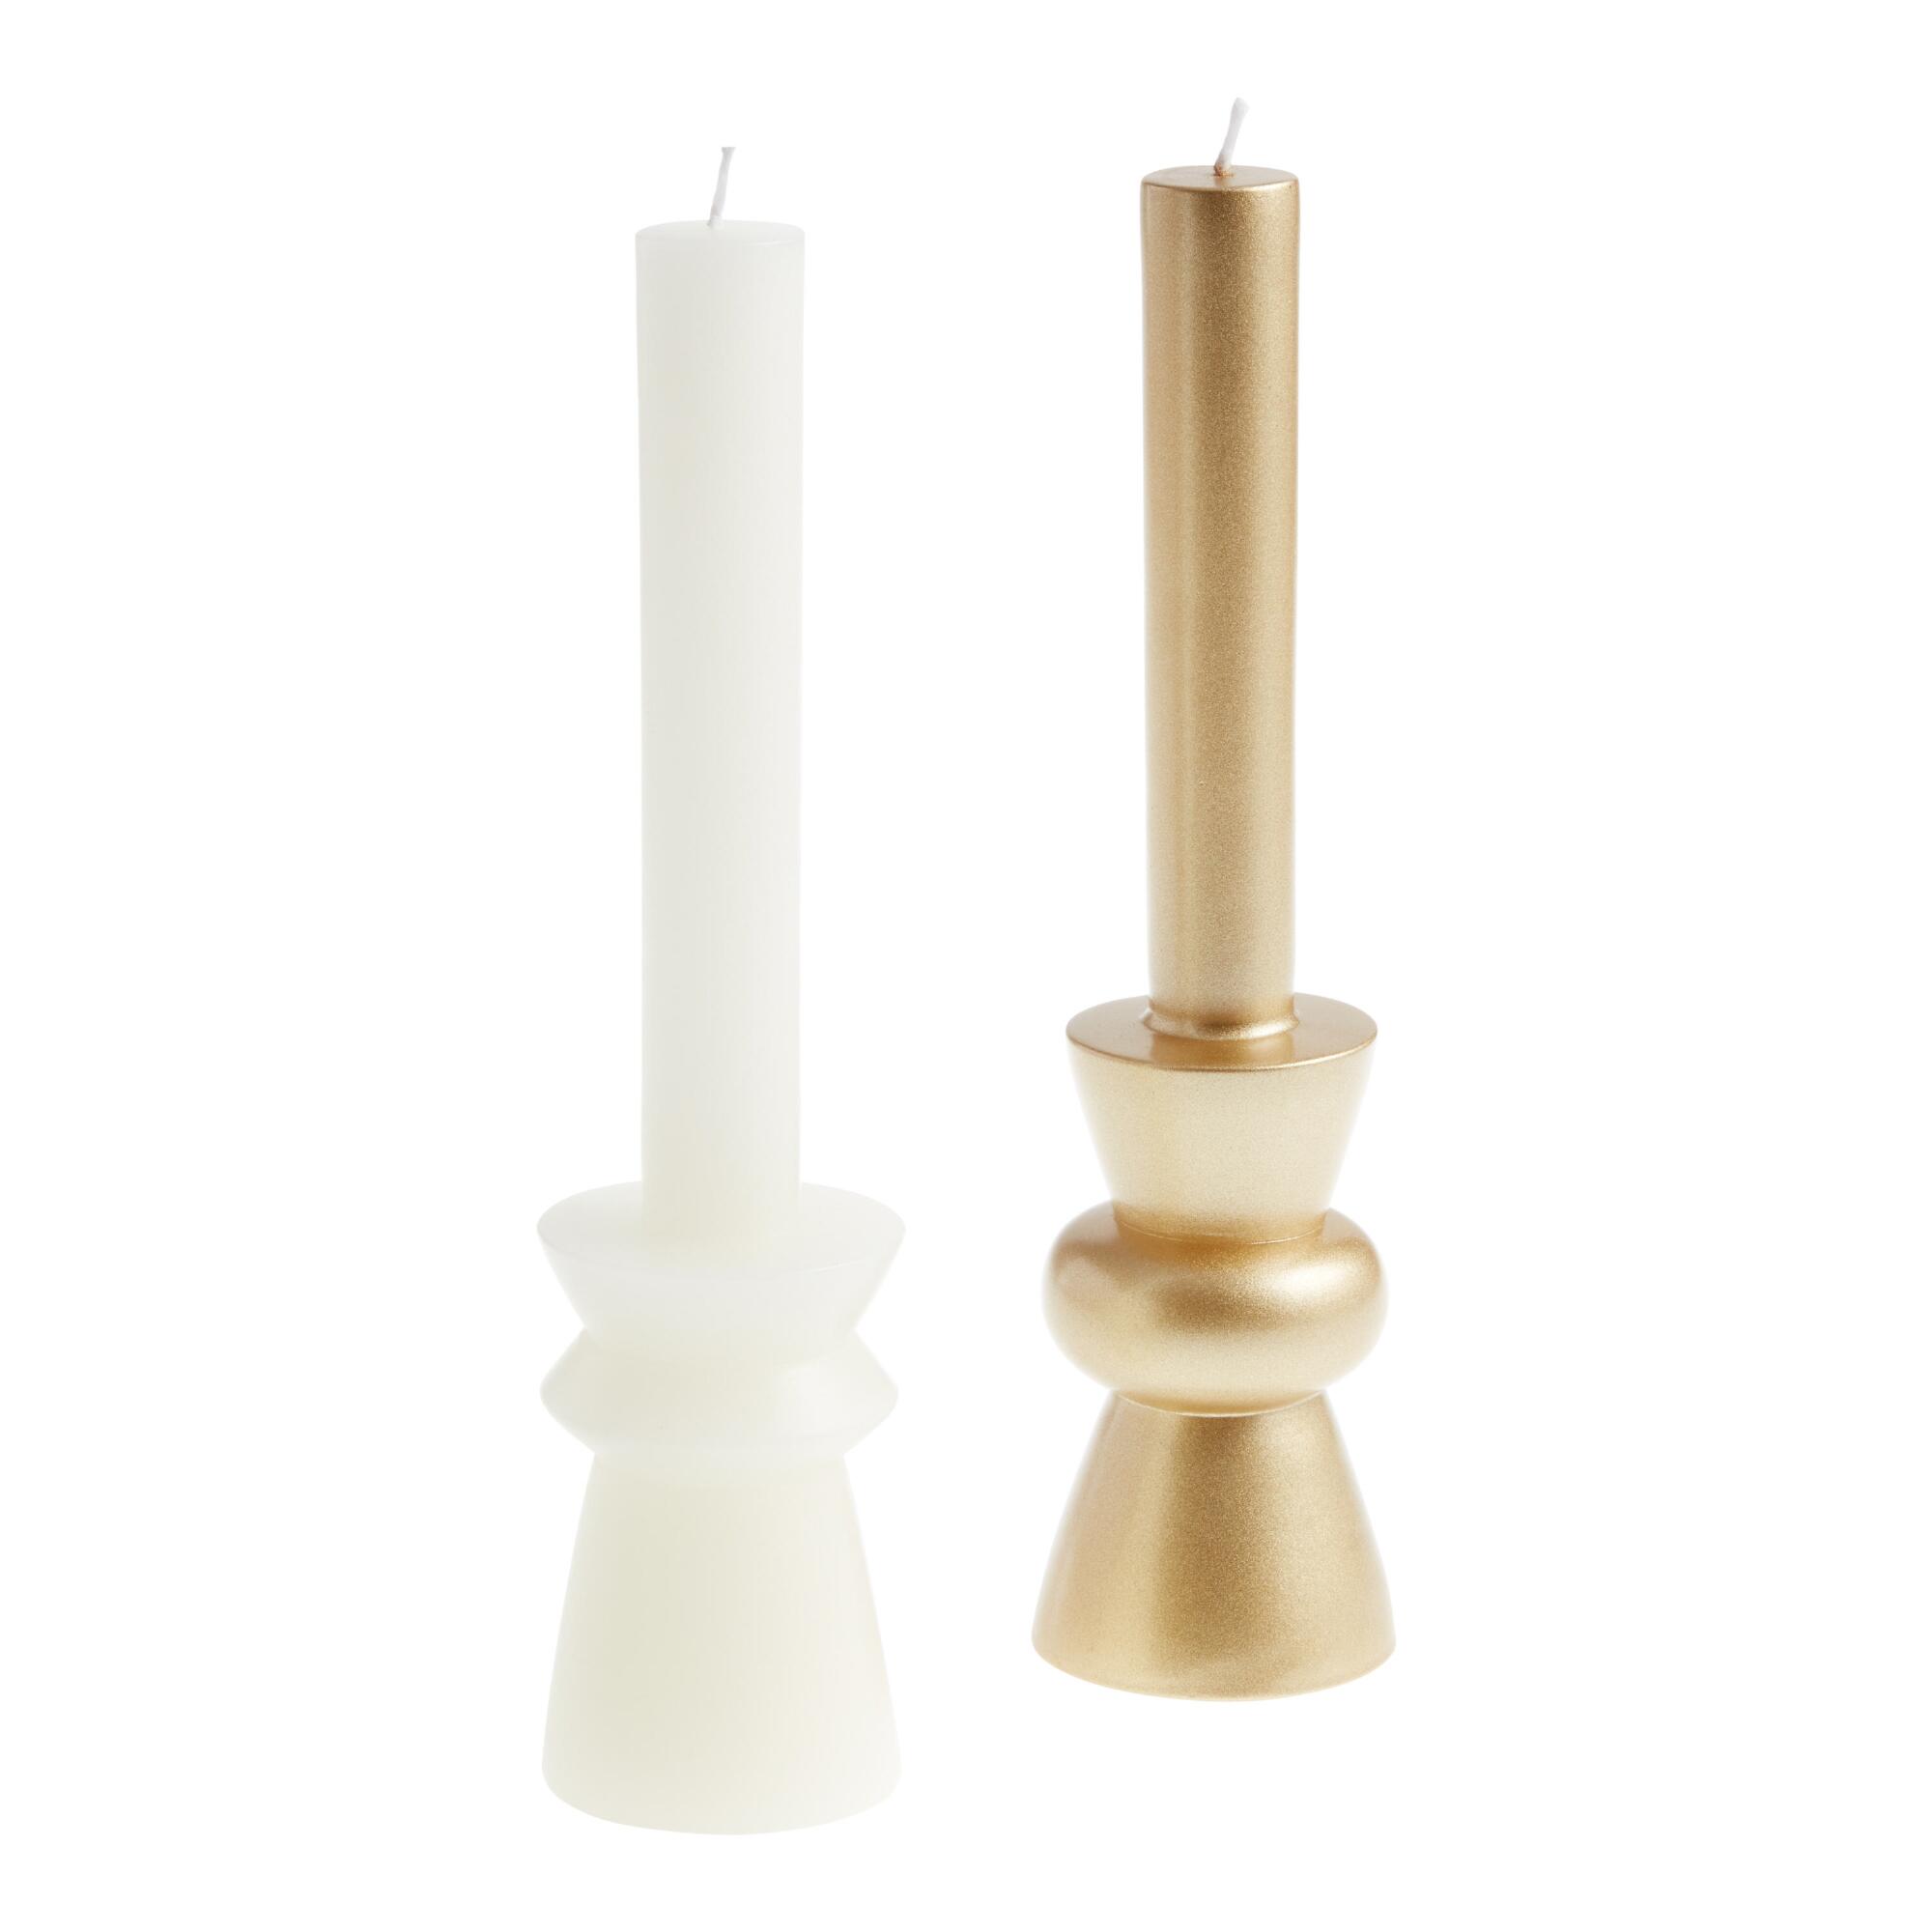 Geo Stacked Taper Candle in Wax Stand: White by World Market